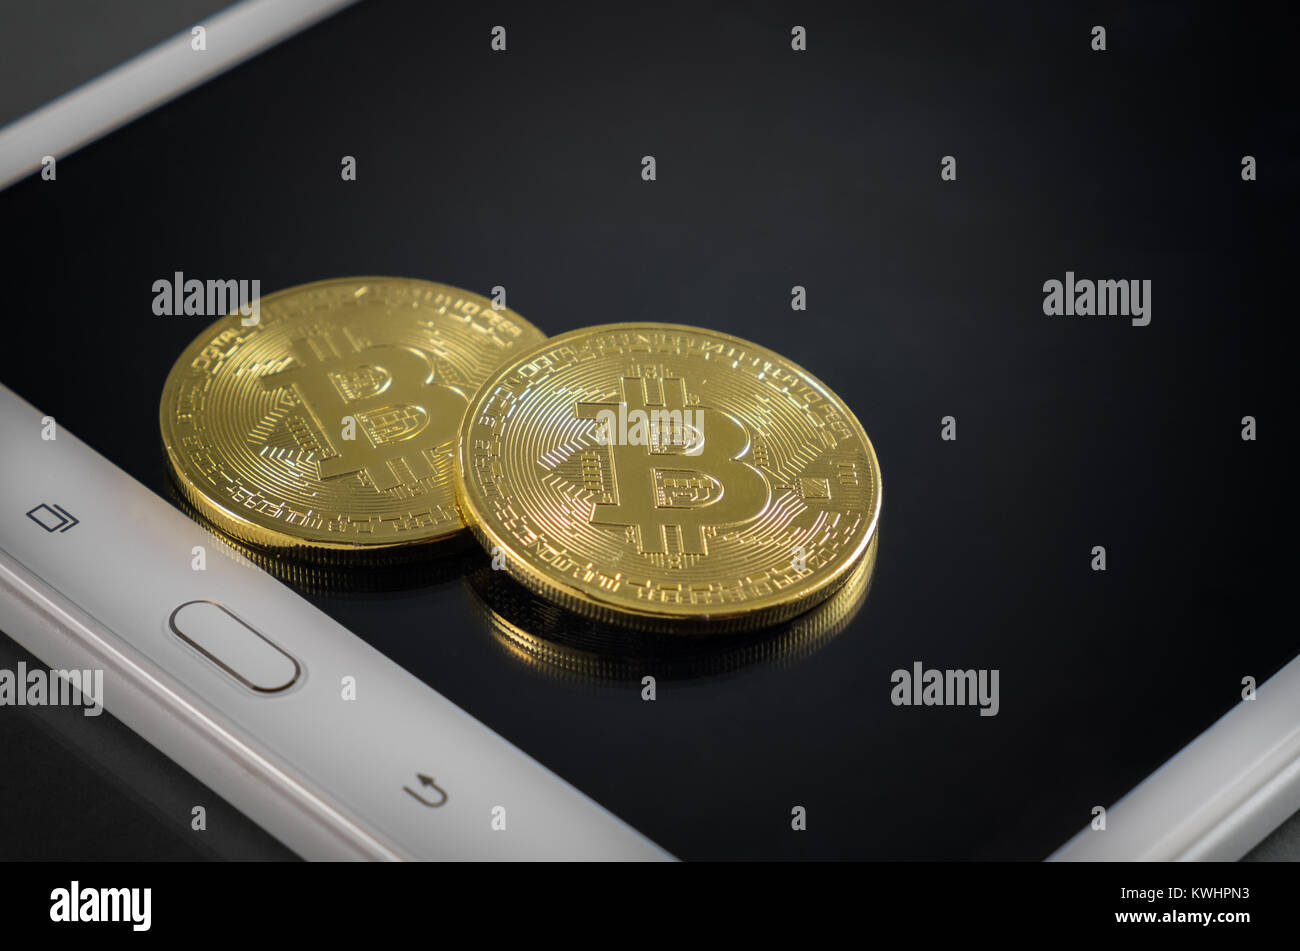 Cryptocurrency physical colored bitcoin coins. Two golden bitcoin with tablet background. Stock Photo